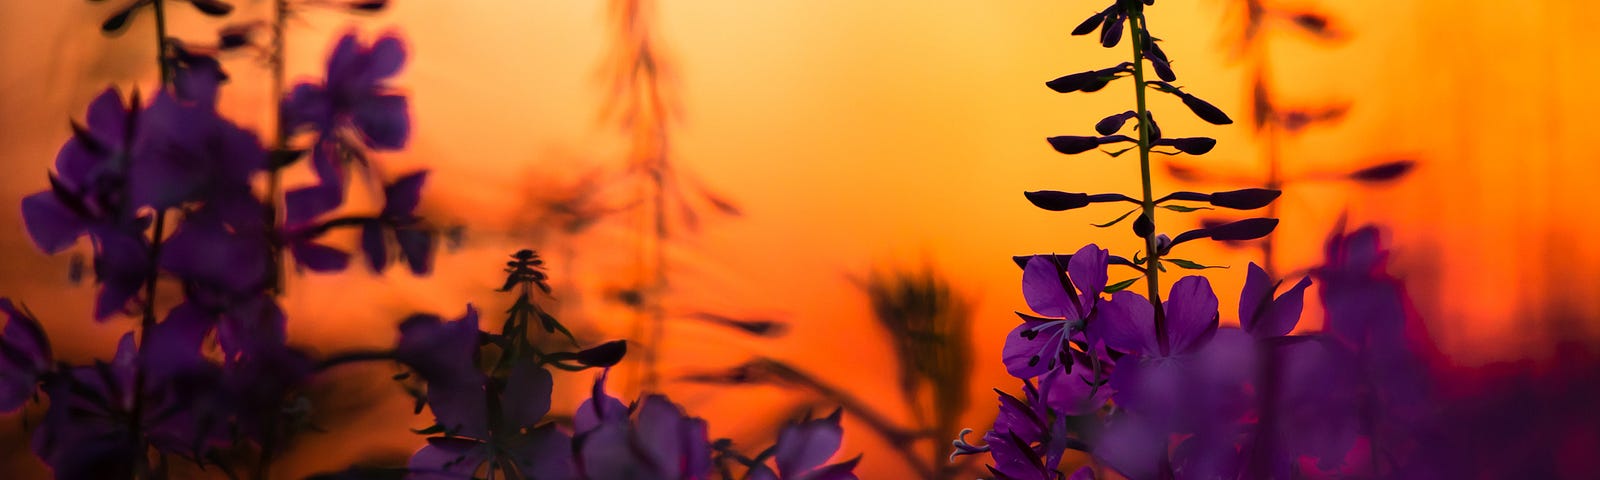 fireweed up close at sunset